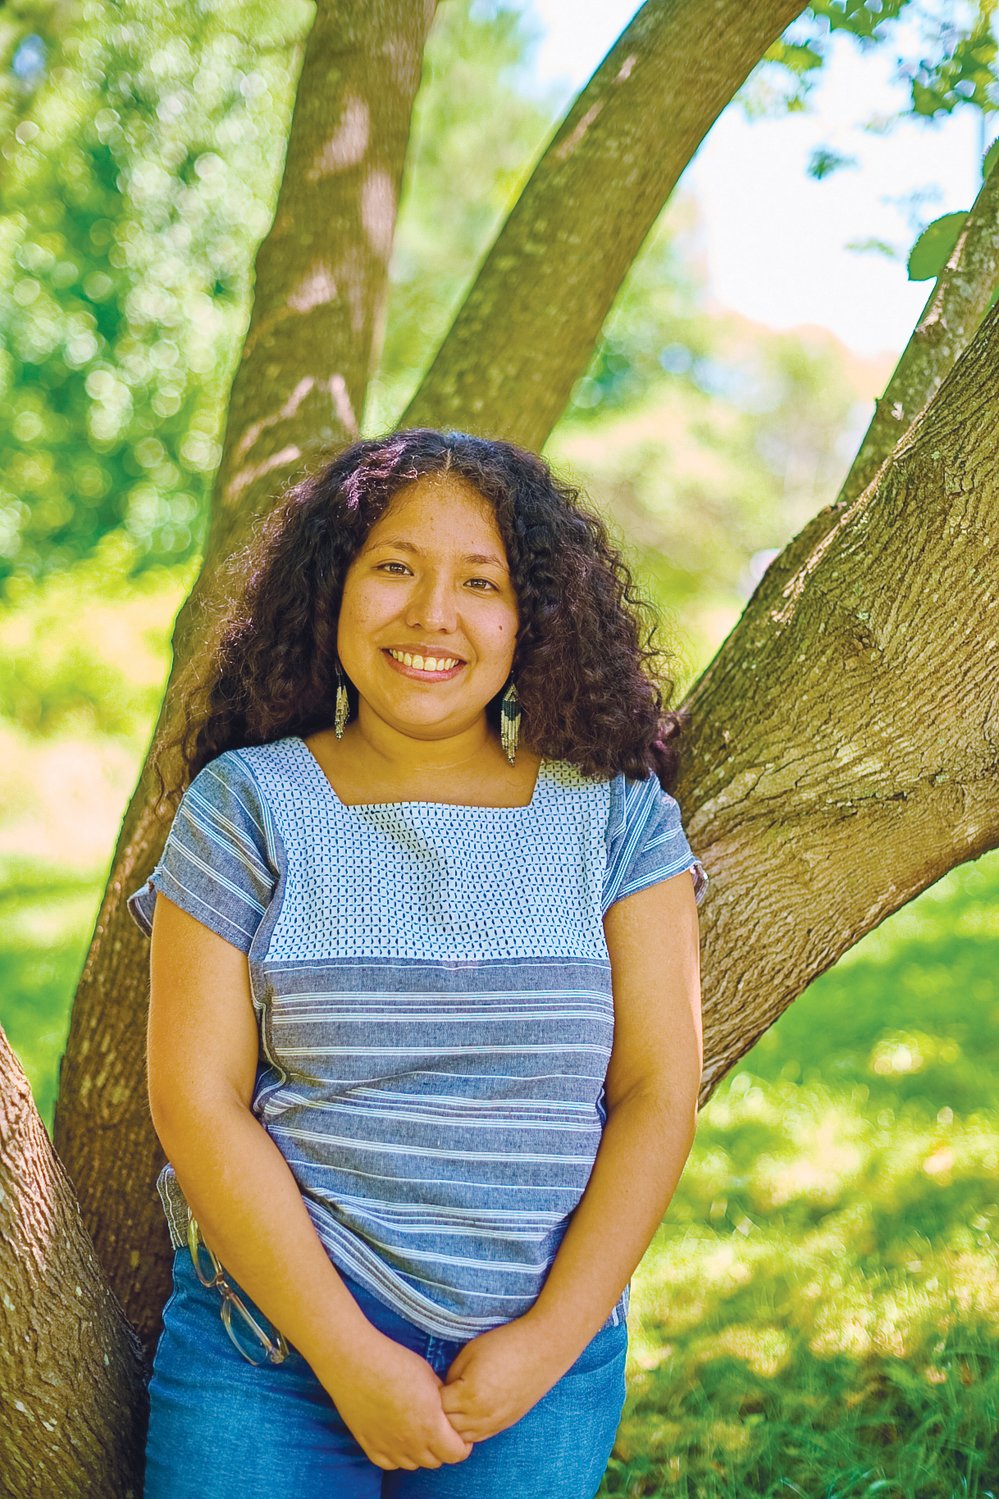 Asheboro native Joselyn Villaseñor is Chatham Literacy's newest program coordinator. Bilingual in English and Spanish, she joined Chatham Literacy in April.